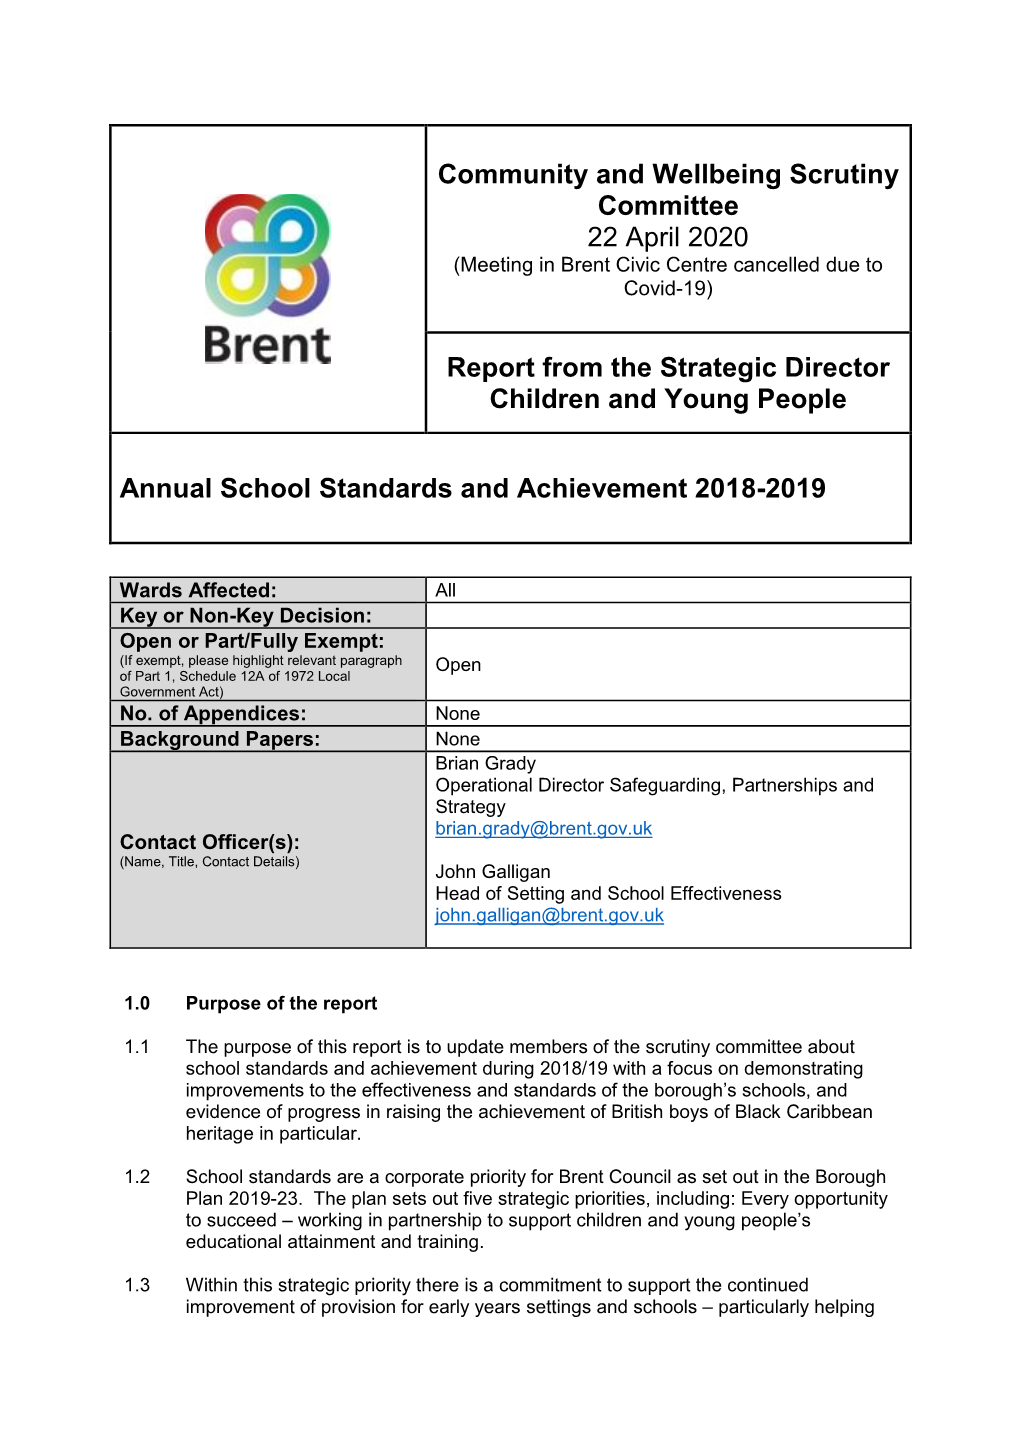 Community and Wellbeing Scrutiny Committee 22 April 2020 Report